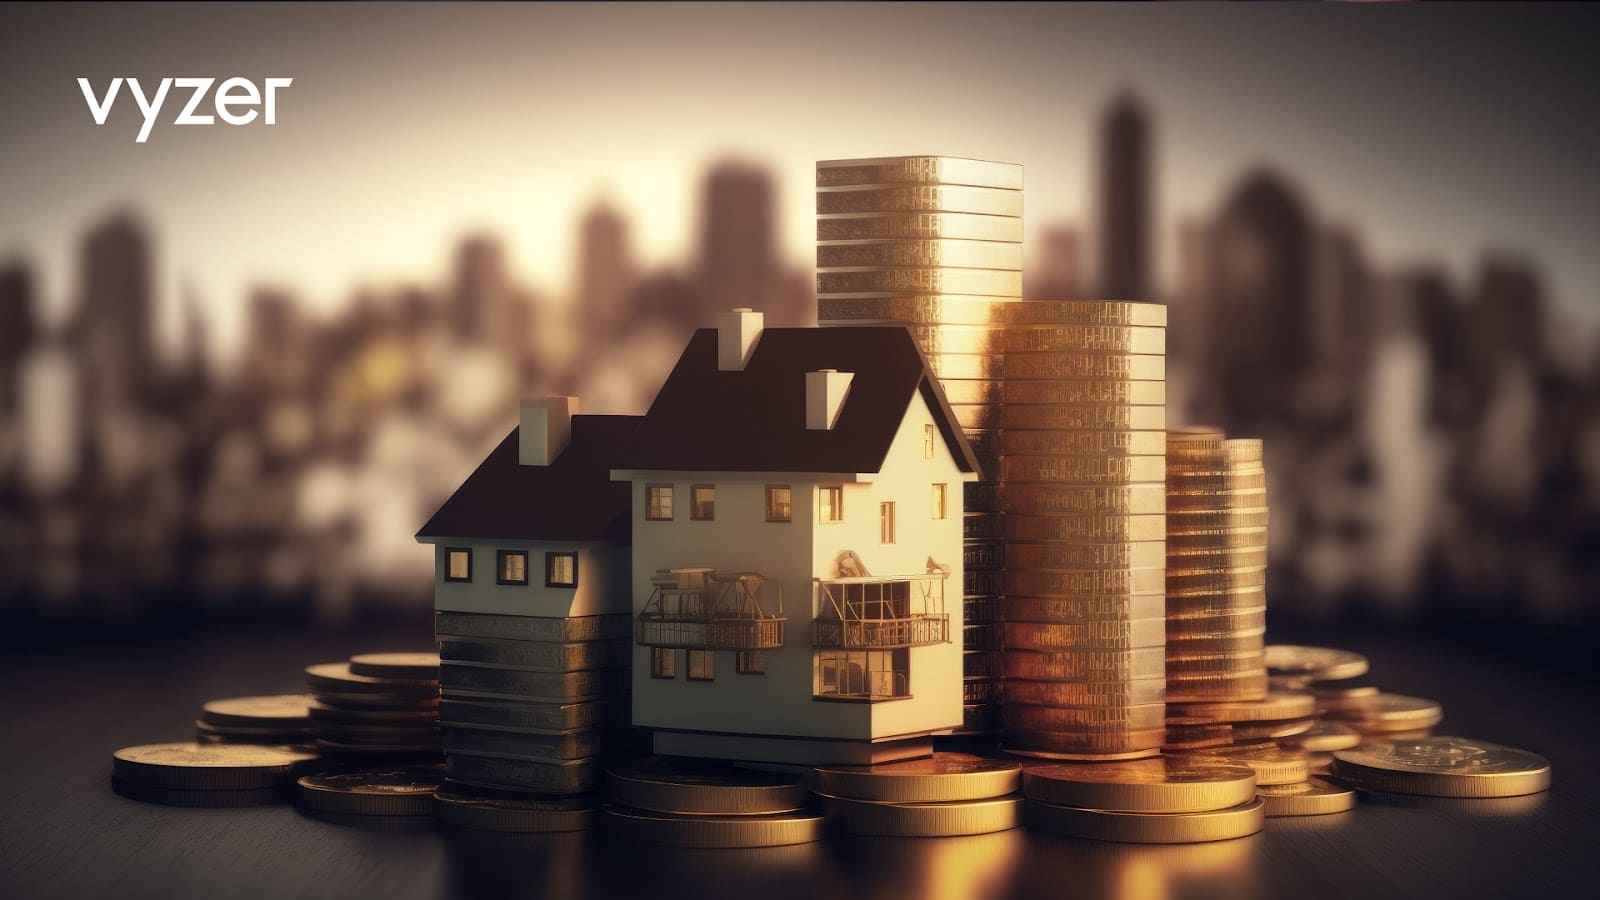 Strategic Real Estate Investment: Property Assets and Wealth Growth